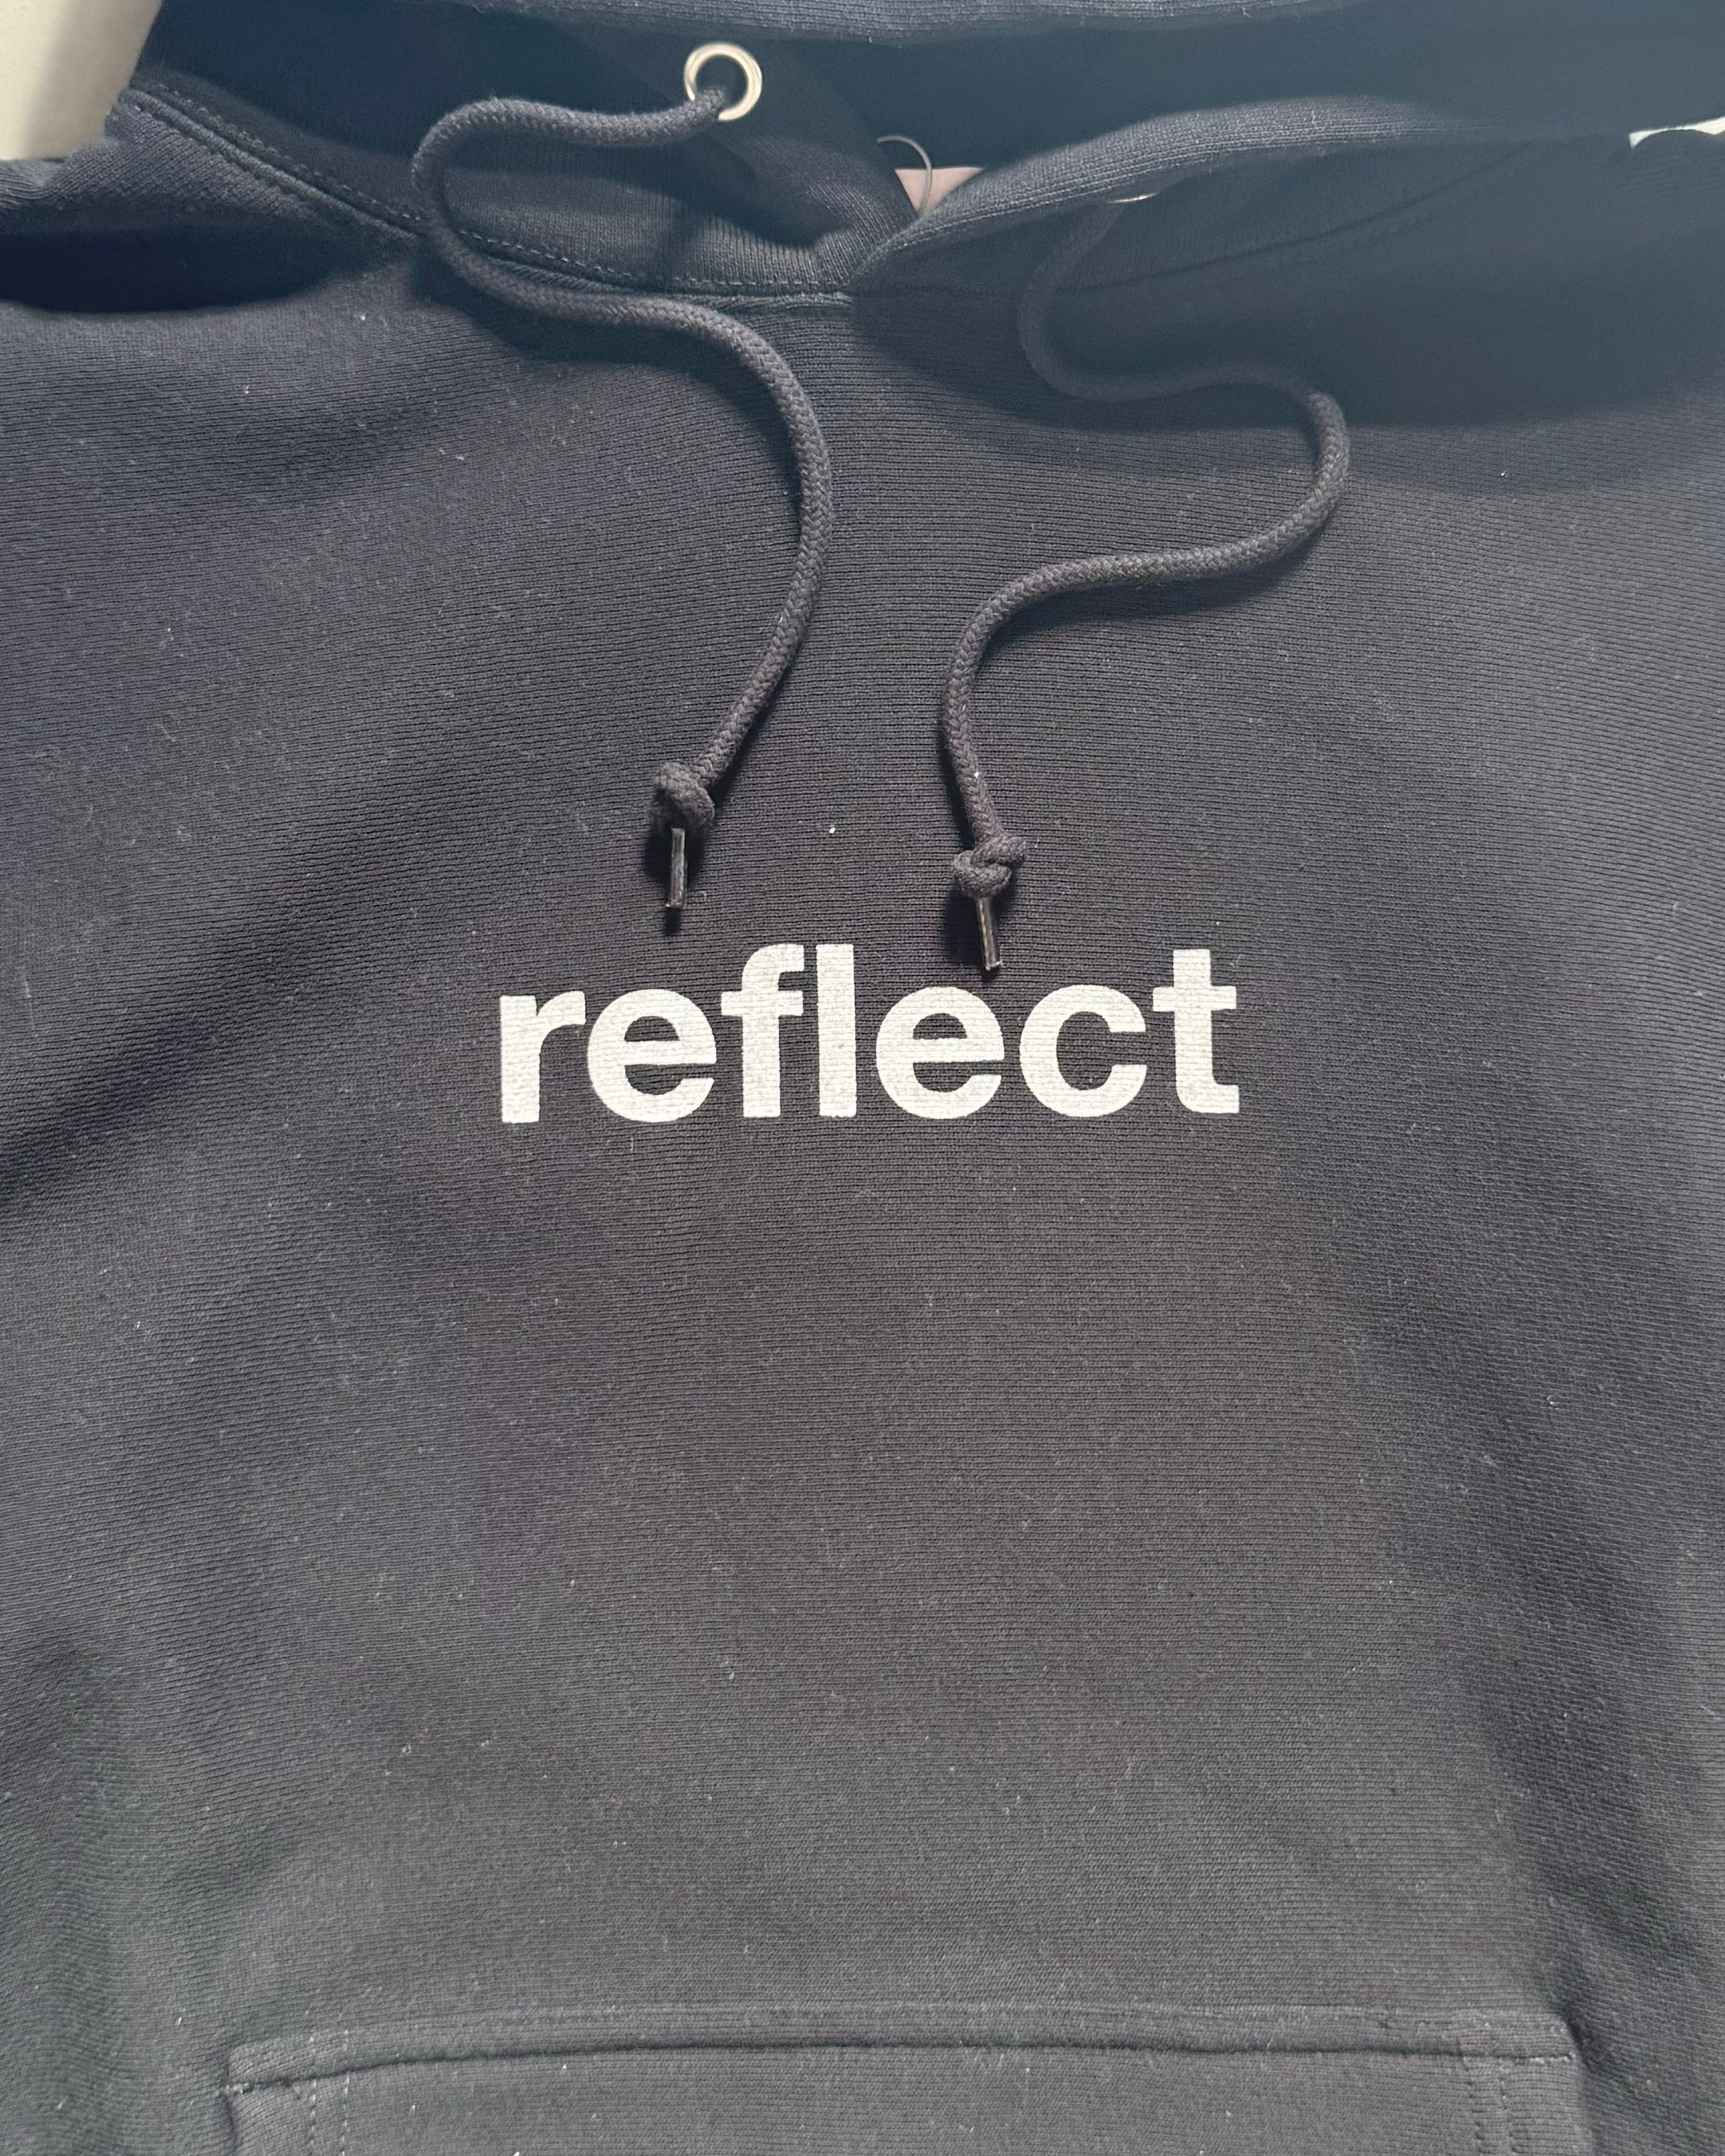 TODAY edition / reflect #01 Hooded Sweat - BLACK